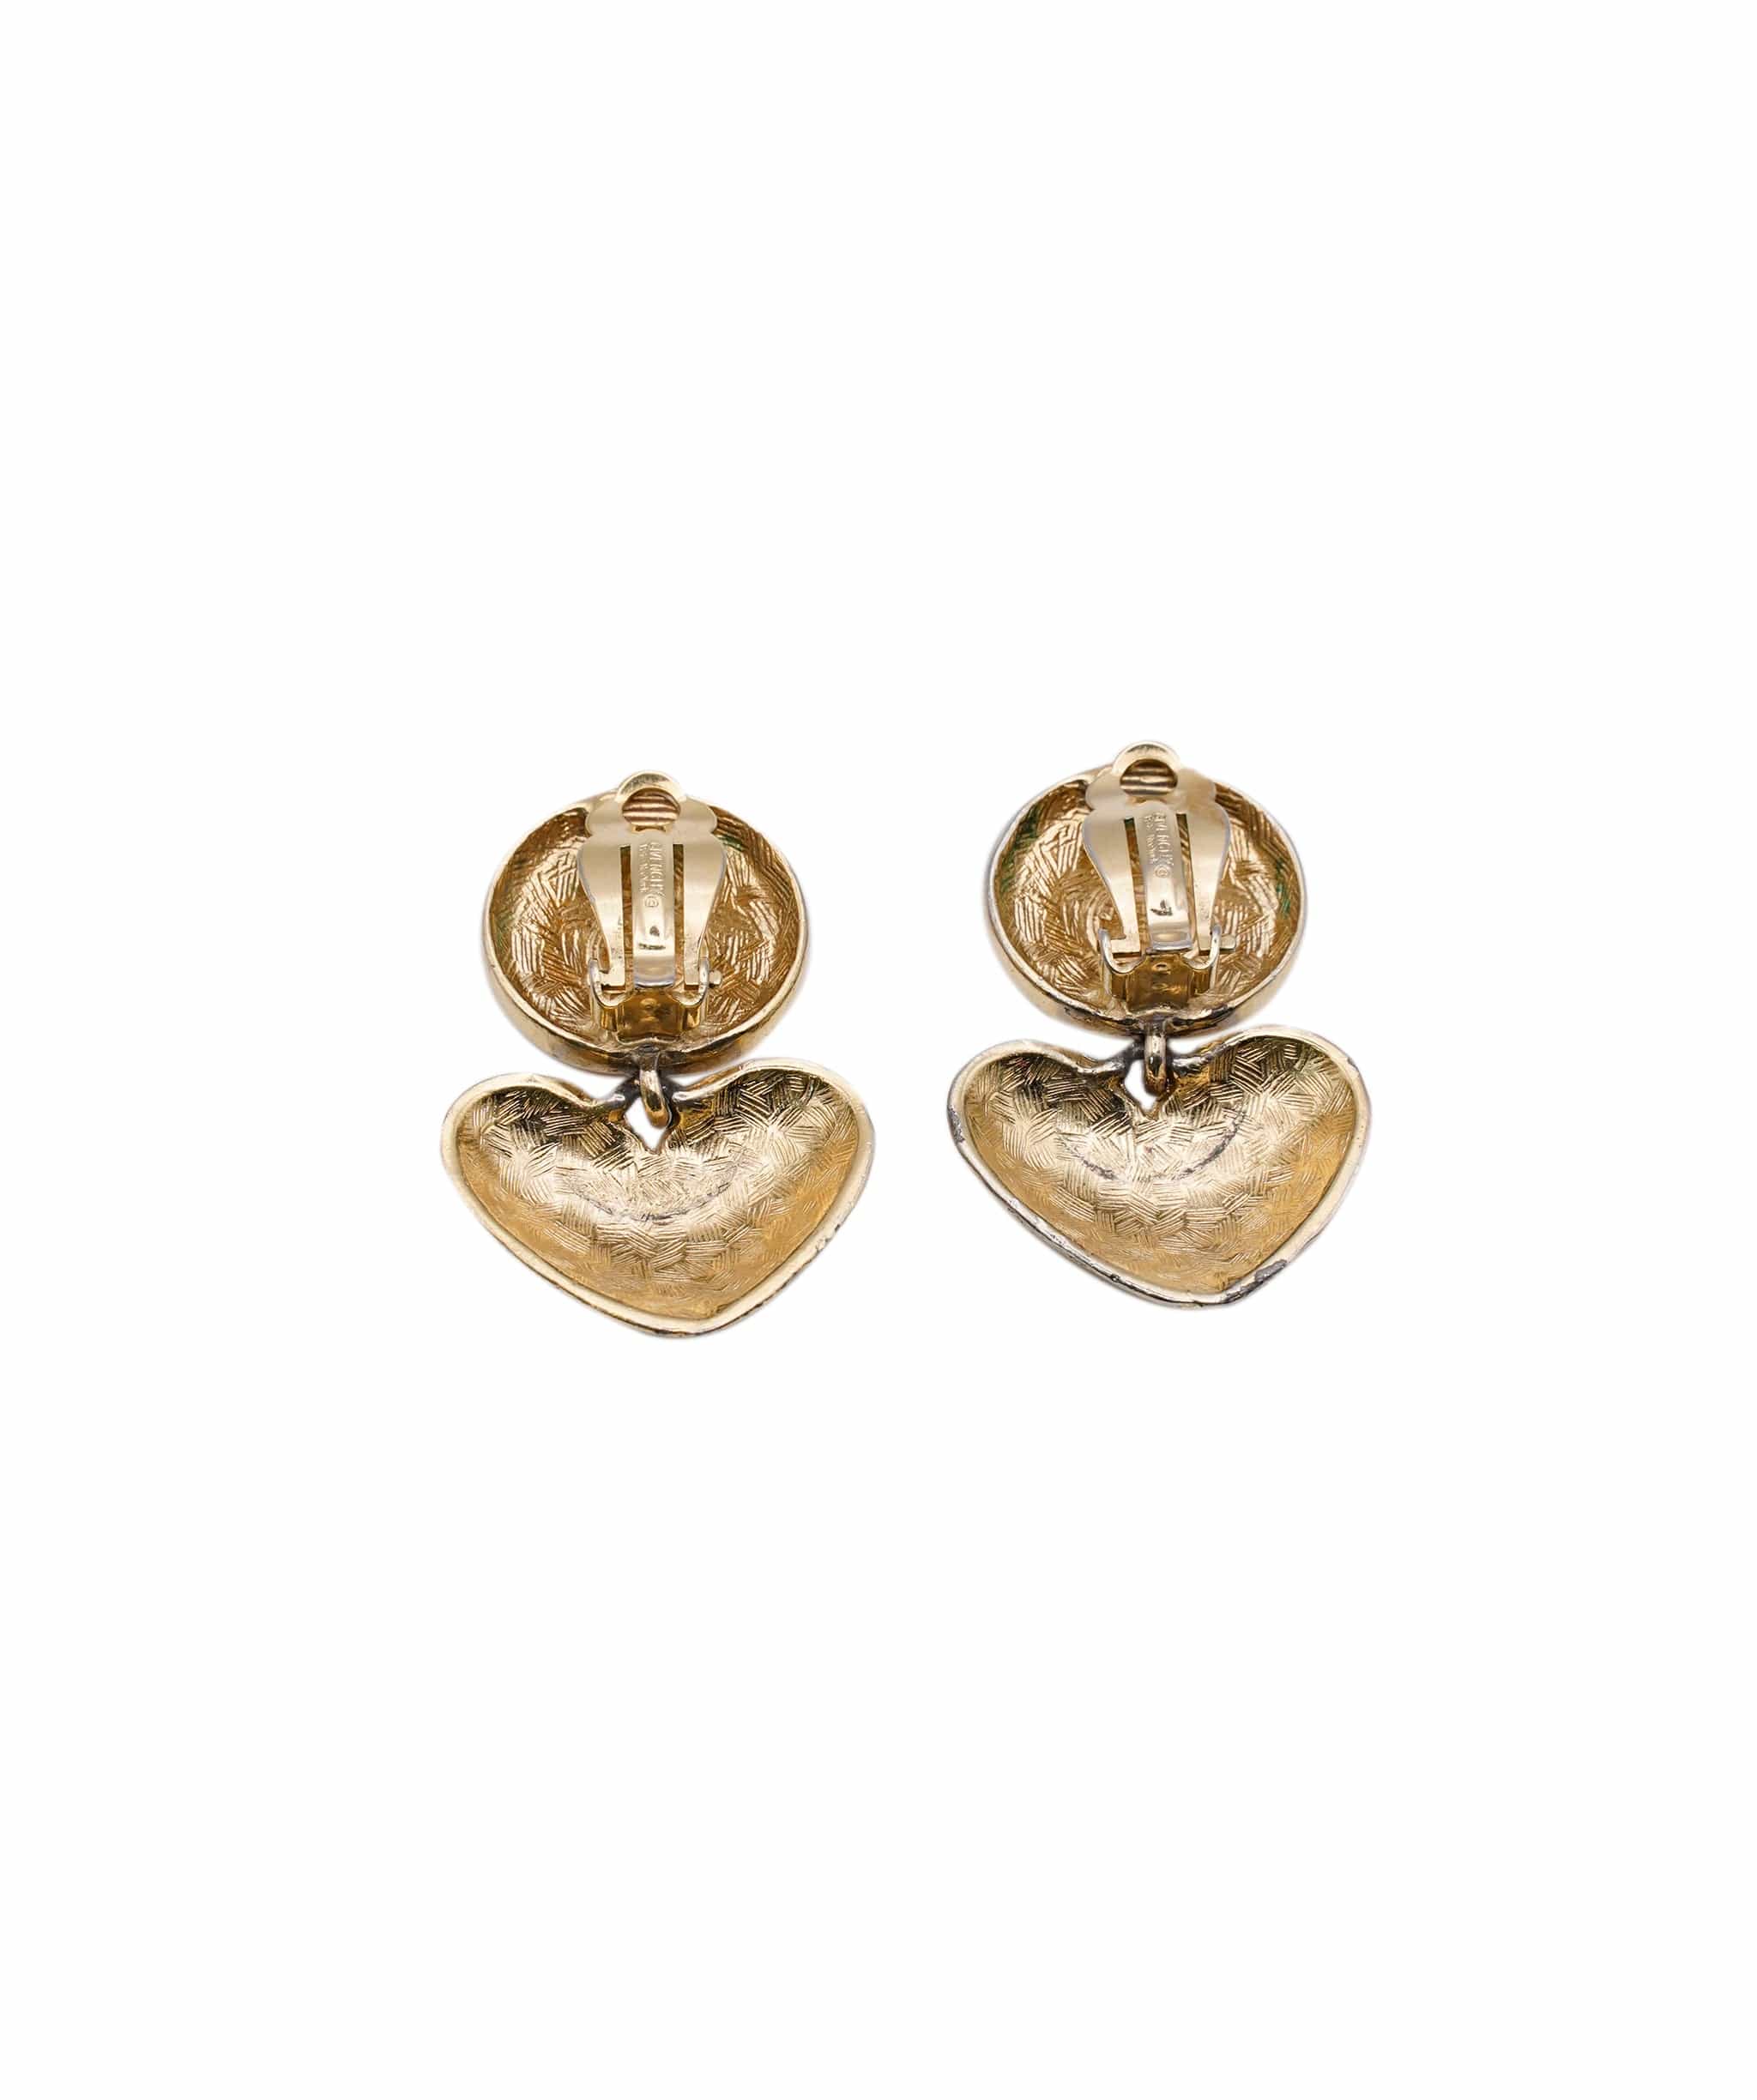 Givenchy givenchy pendant earrings AWL4520